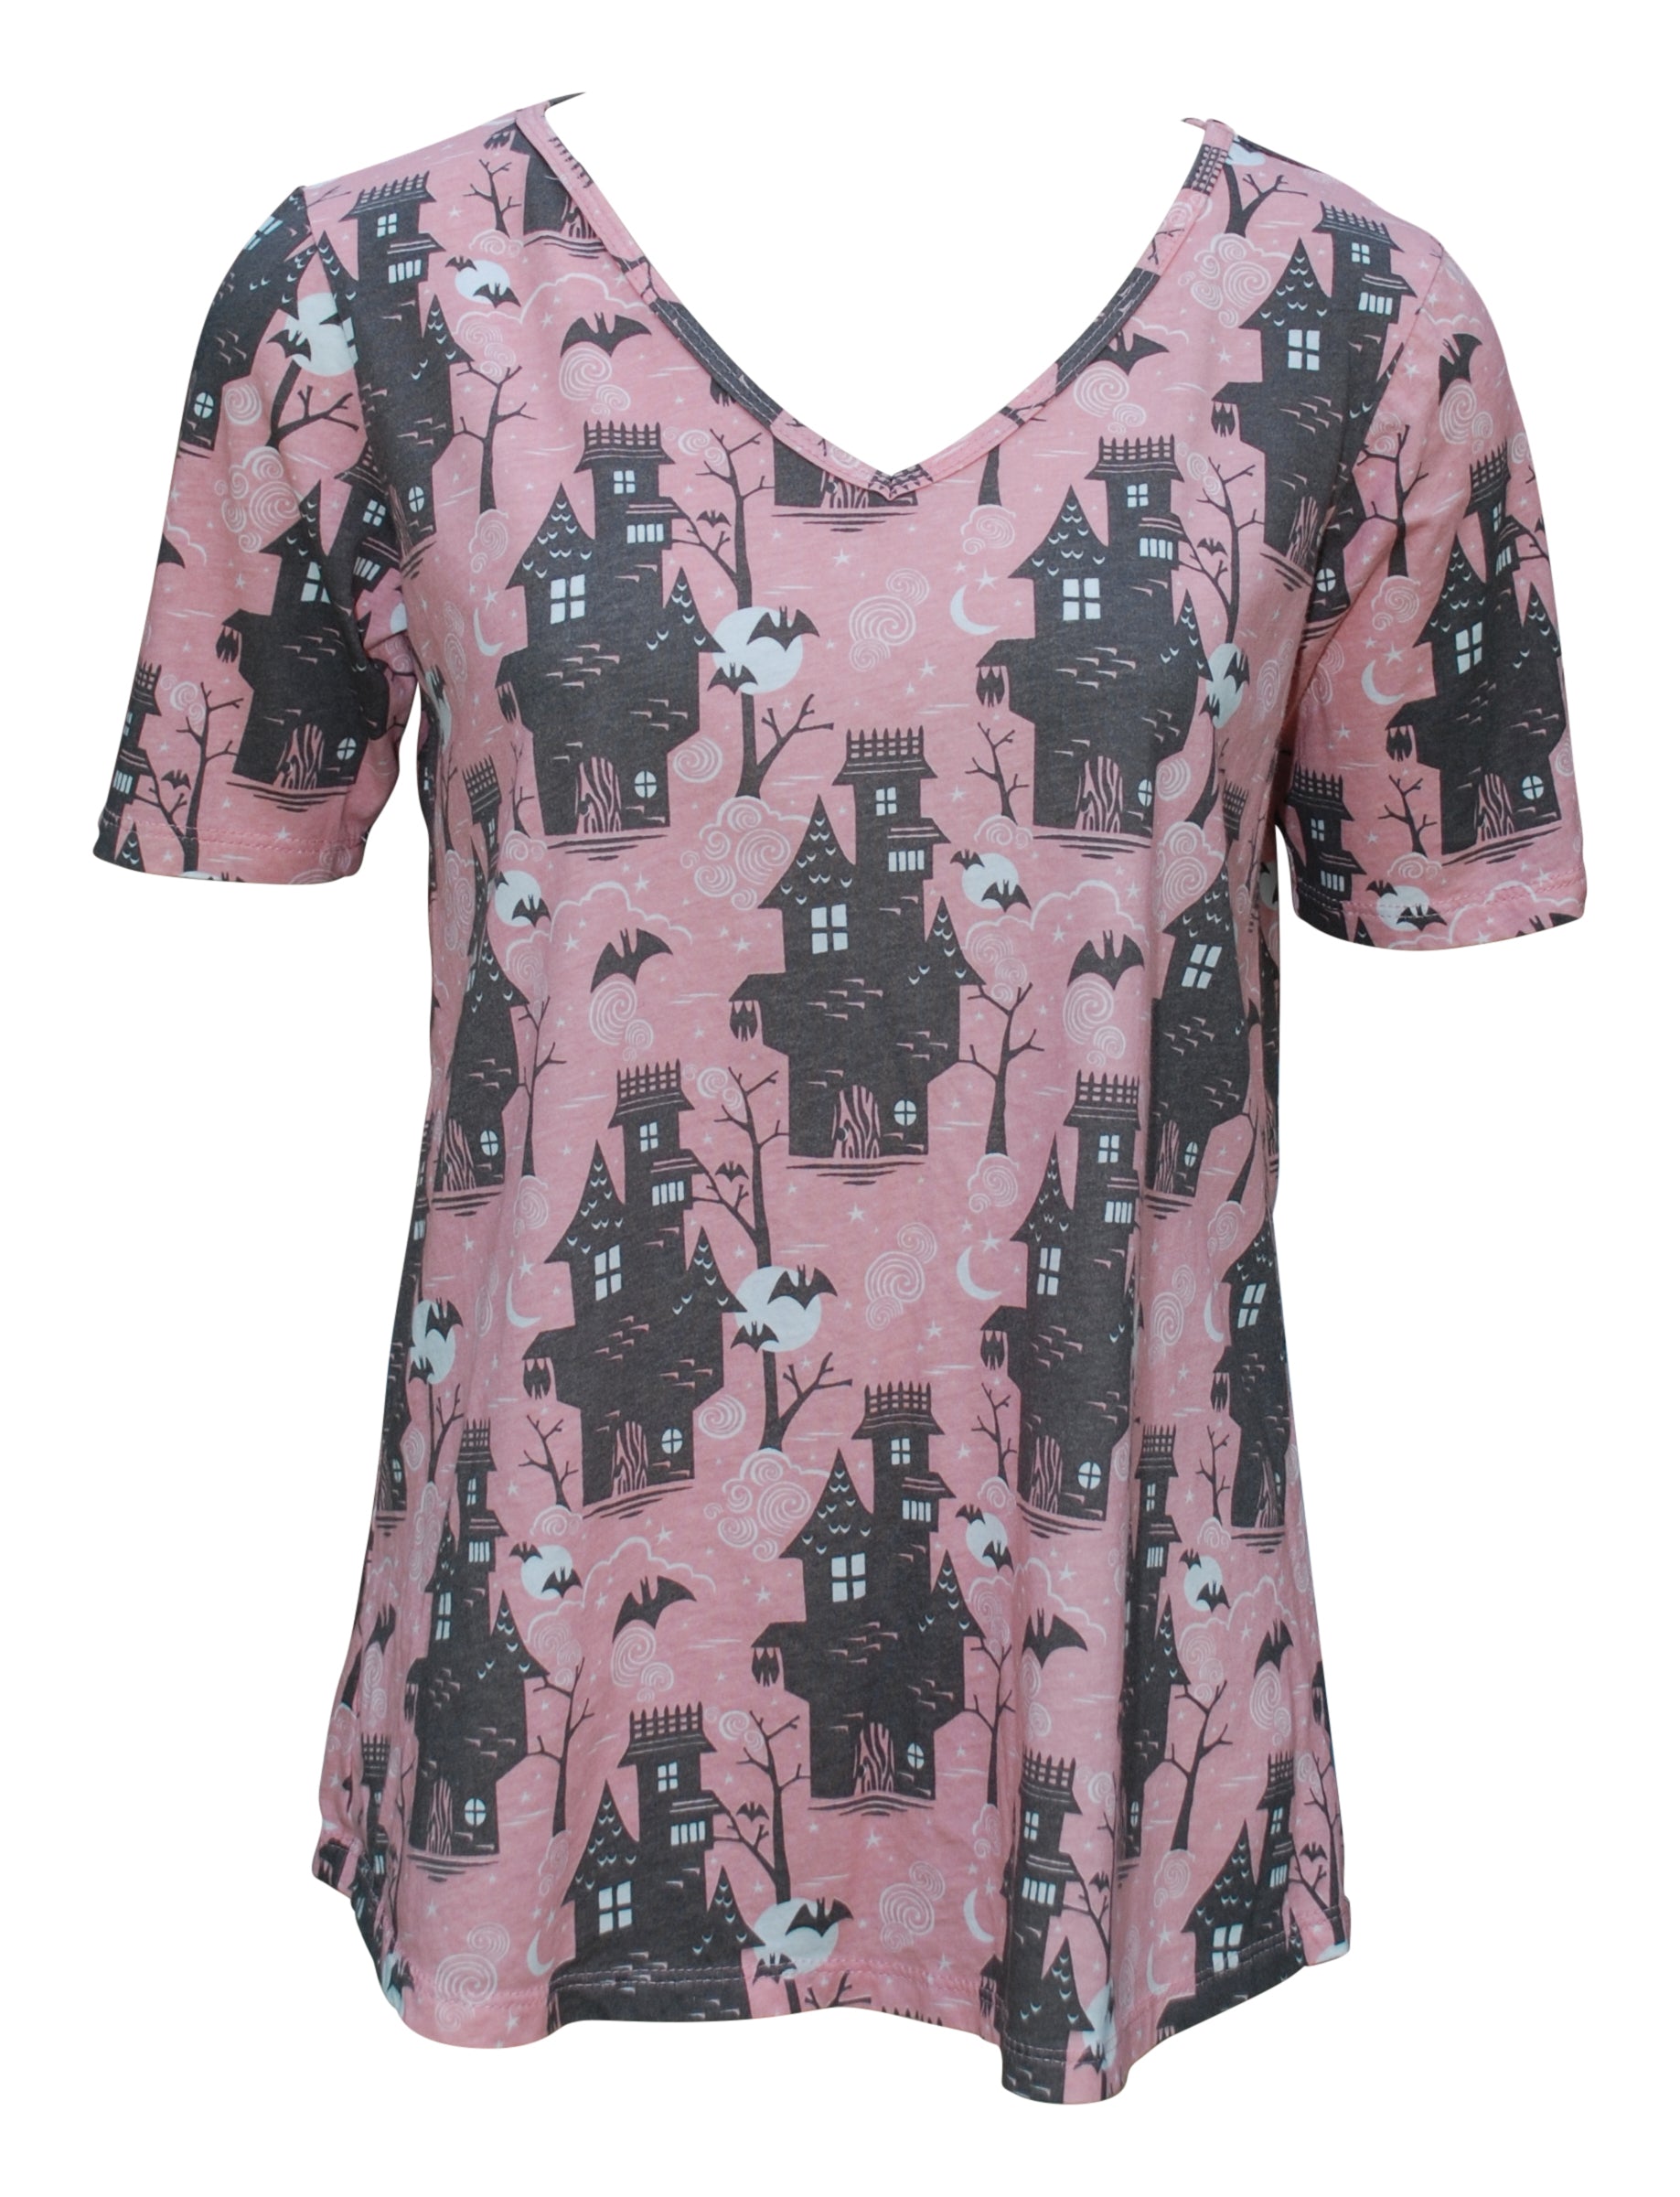 Light pink and grey spooky haunted house print v-neck tee